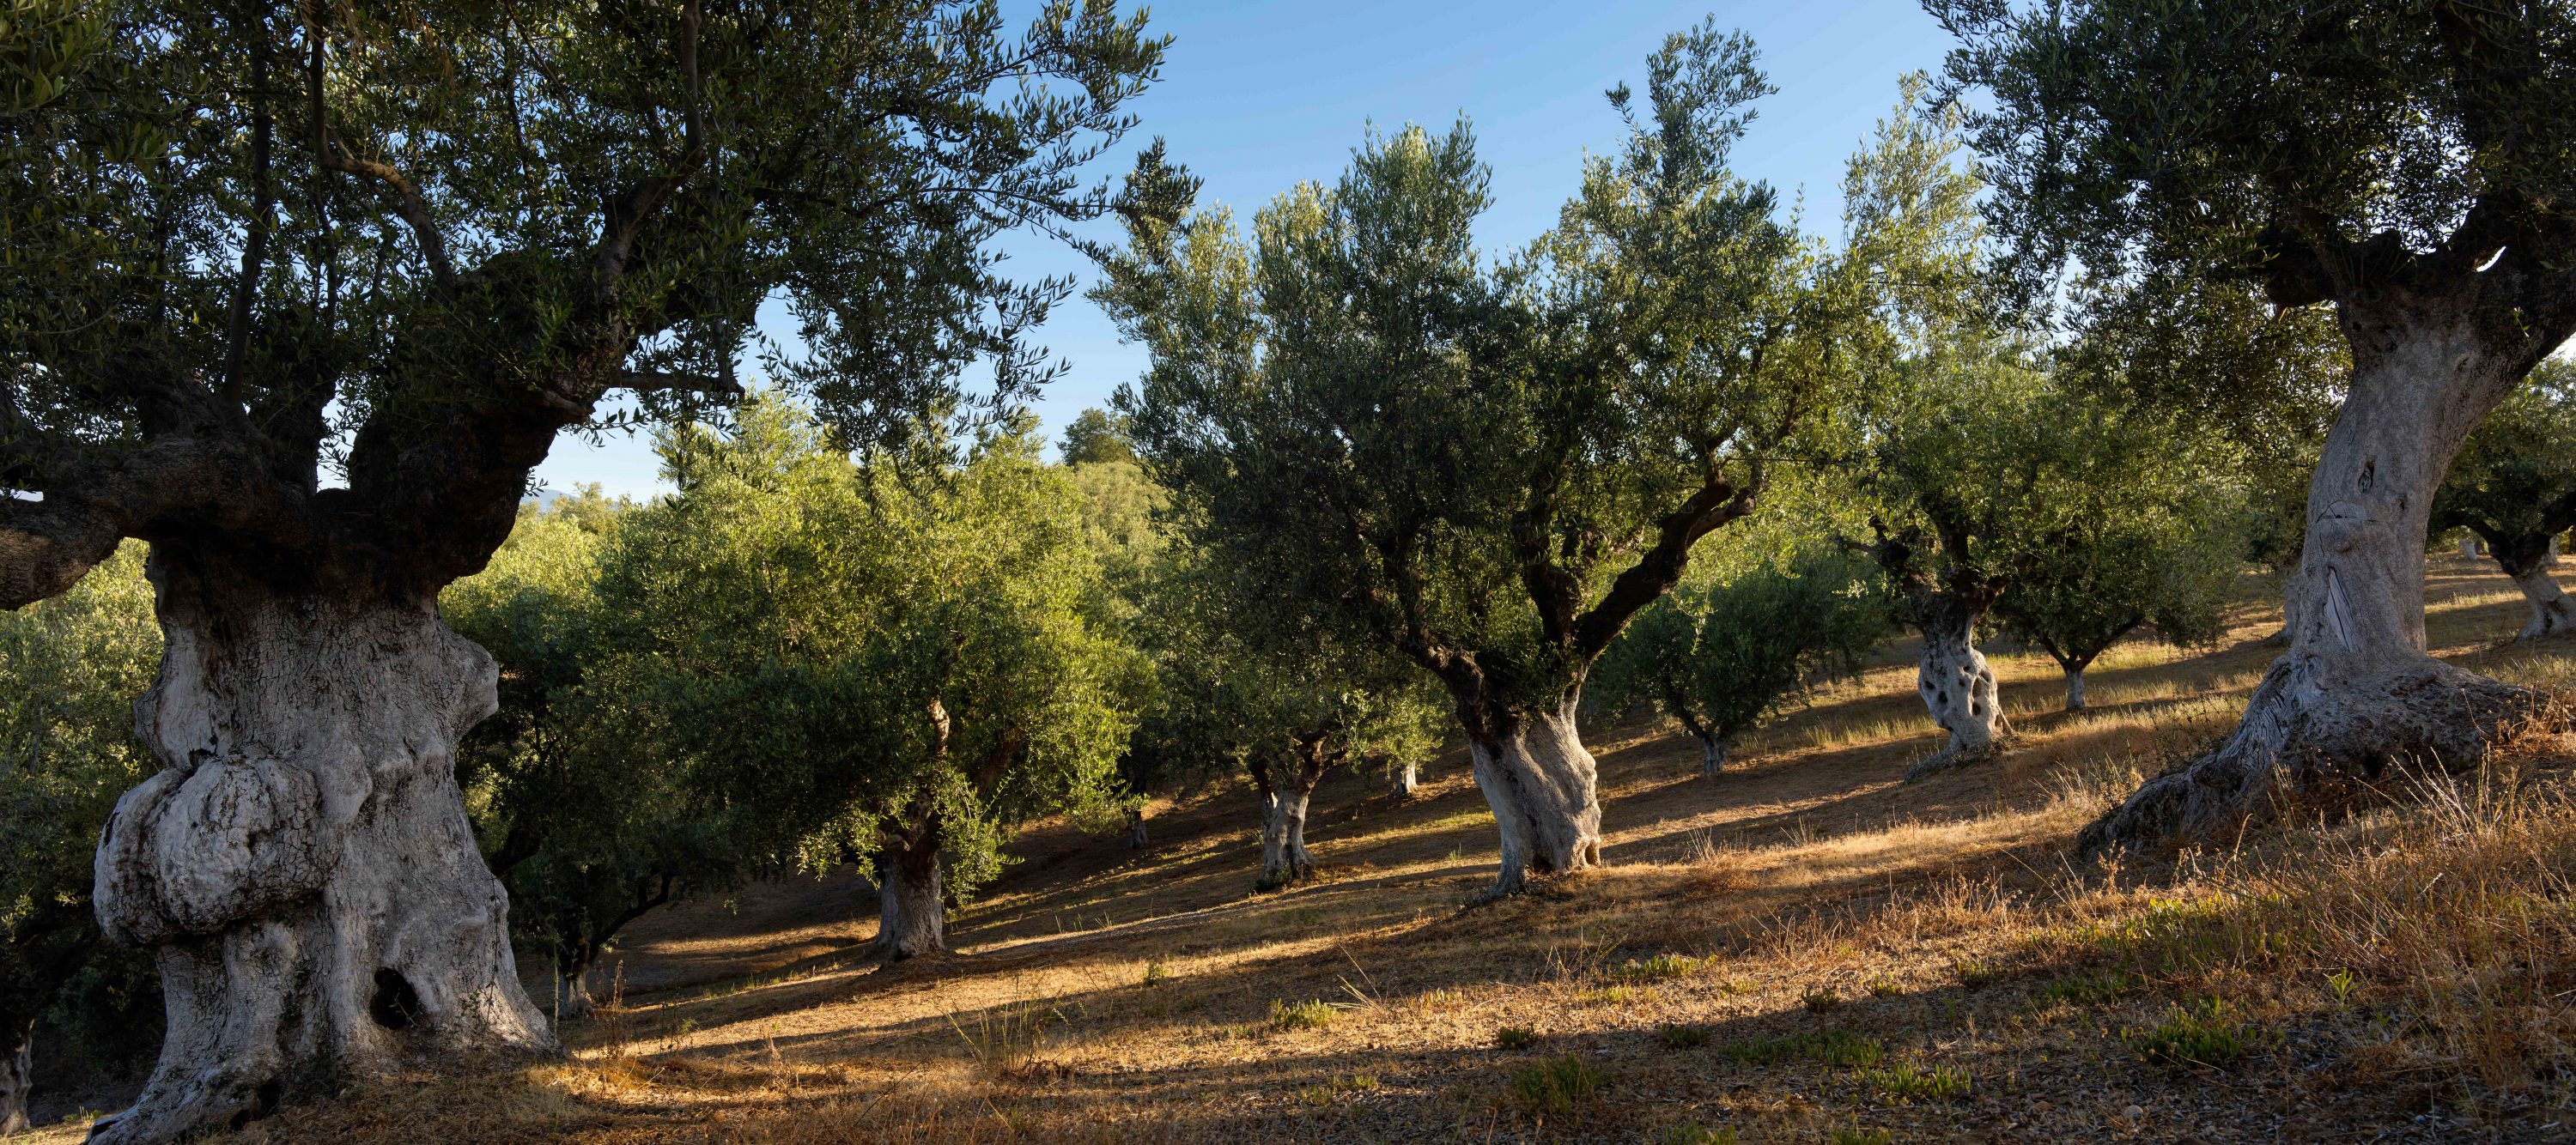 Olive trees a story for Resilience Food Stories in Greece by photographer Ruud Sies